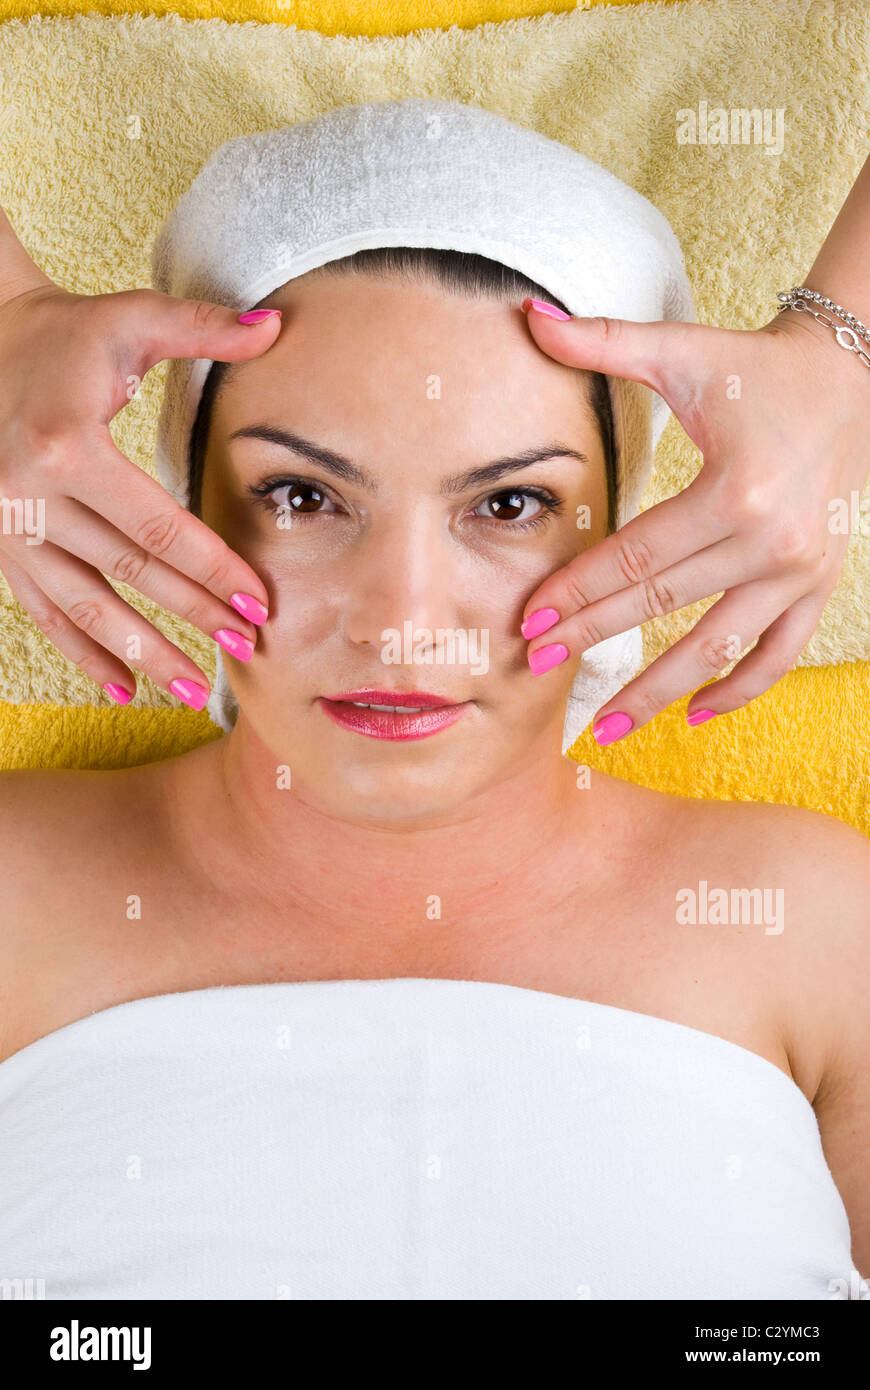 Young woman getting a facial massage at spa Stock Photo